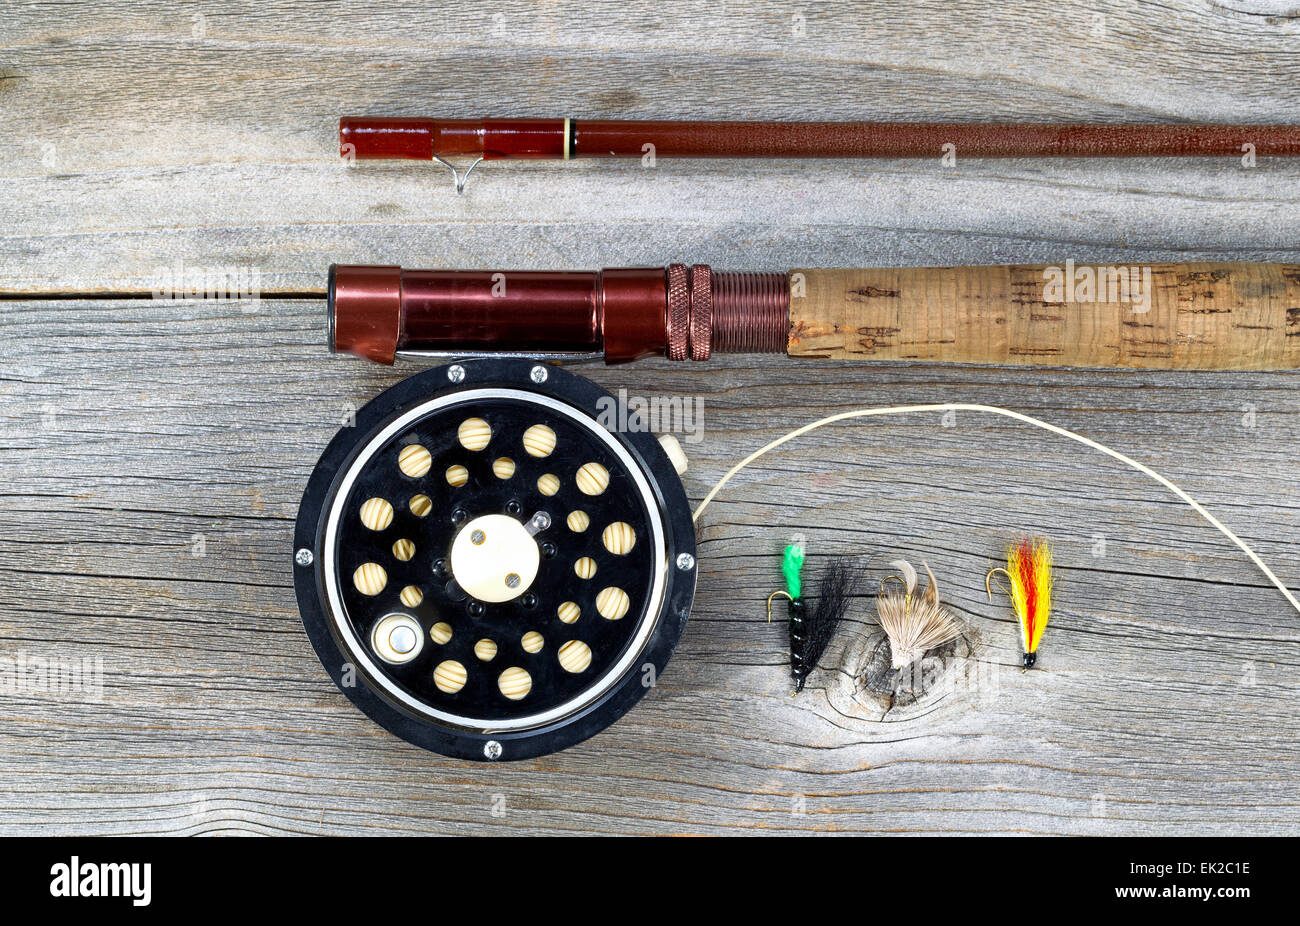 Antique fly fishing reel and rod on rustic wood. Layout in horizontal format. Stock Photo